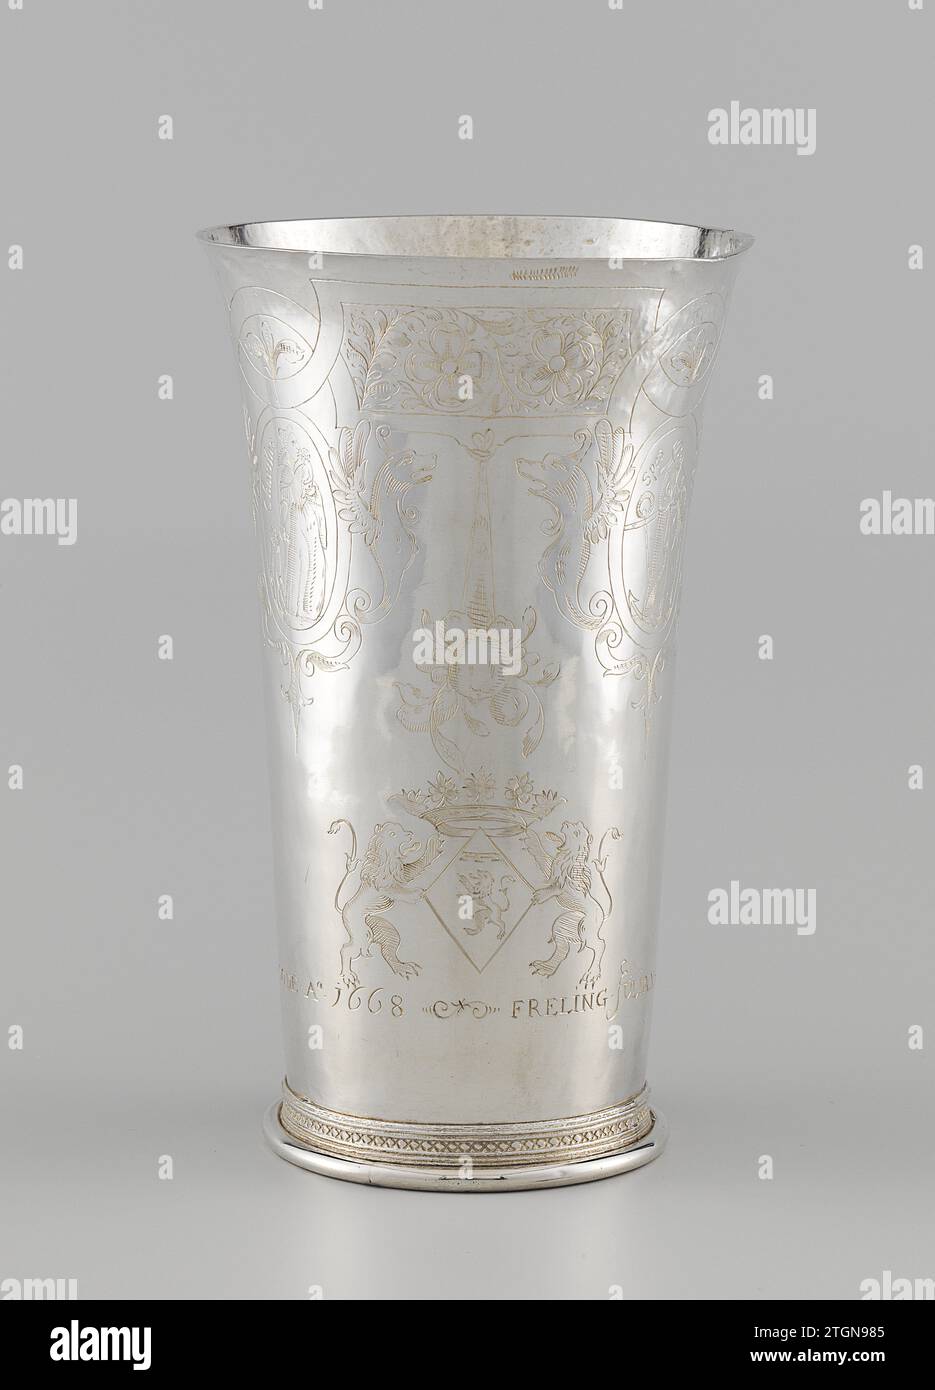 Communion Cup of Vianen, anonymous, c. 1625 Silver cup, widely running up and decorated with engraving work. Decorated with three engraved medallions with Charitas, Spes and Fides. With the inscription: Freling Juliana Born Gravinne van Holland Brederoode AO 1668. Gorinchem silver (metal) Silver cup, widely running up and decorated with engraving work. Decorated with three engraved medallions with Charitas, Spes and Fides. With the inscription: Freling Juliana Born Gravinne van Holland Brederoode AO 1668. Gorinchem silver (metal) Stock Photo